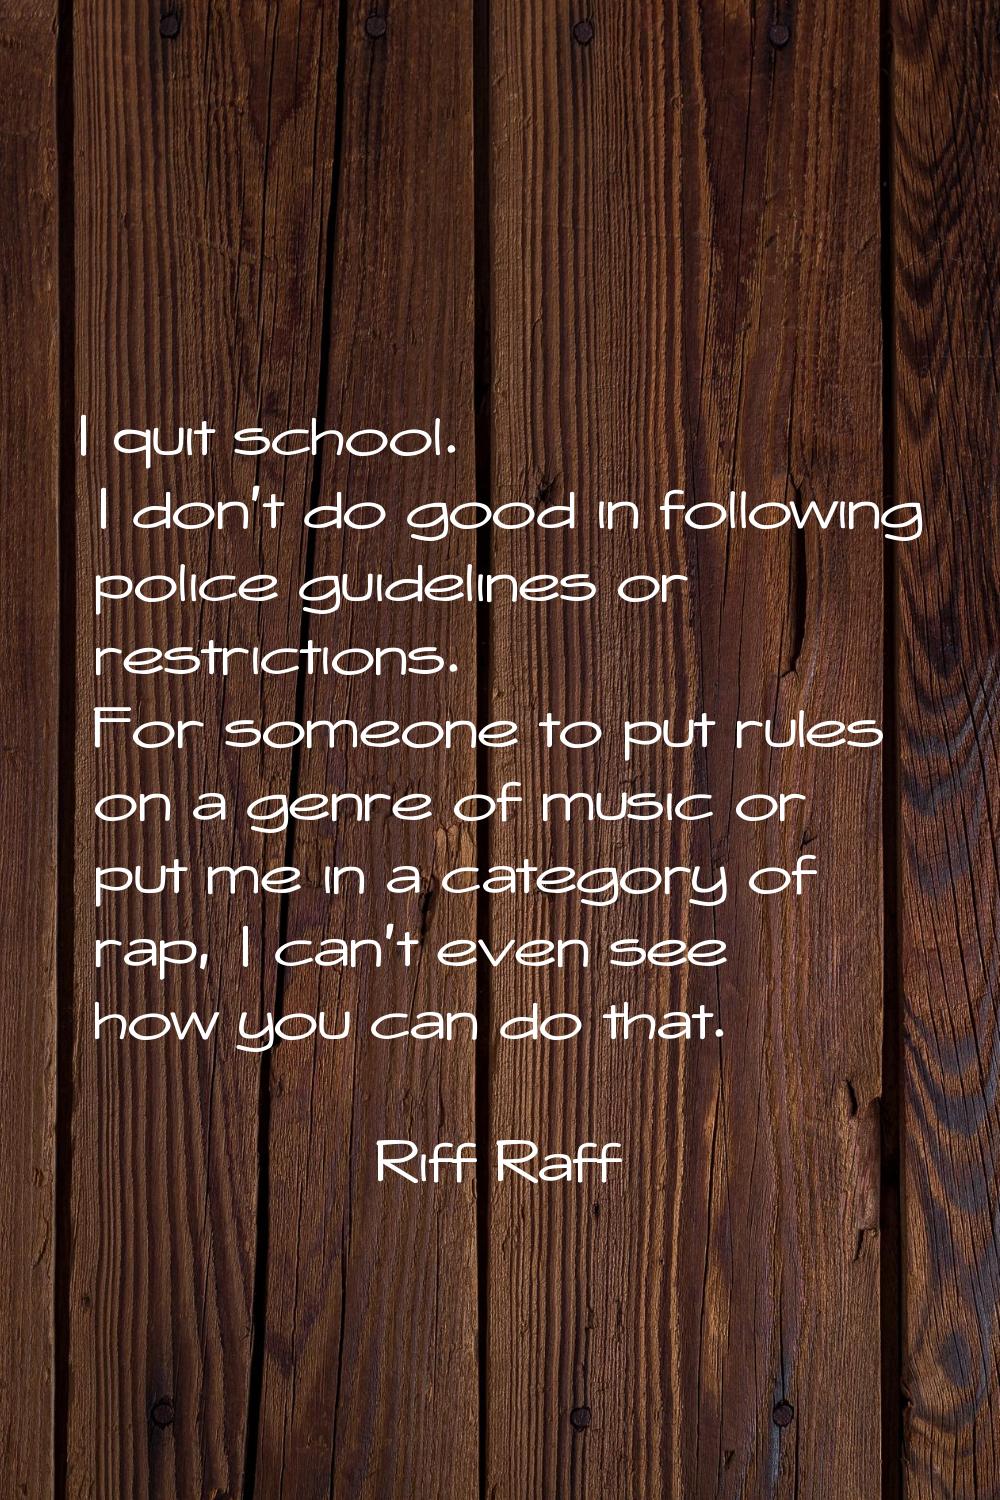 I quit school. I don't do good in following police guidelines or restrictions. For someone to put r